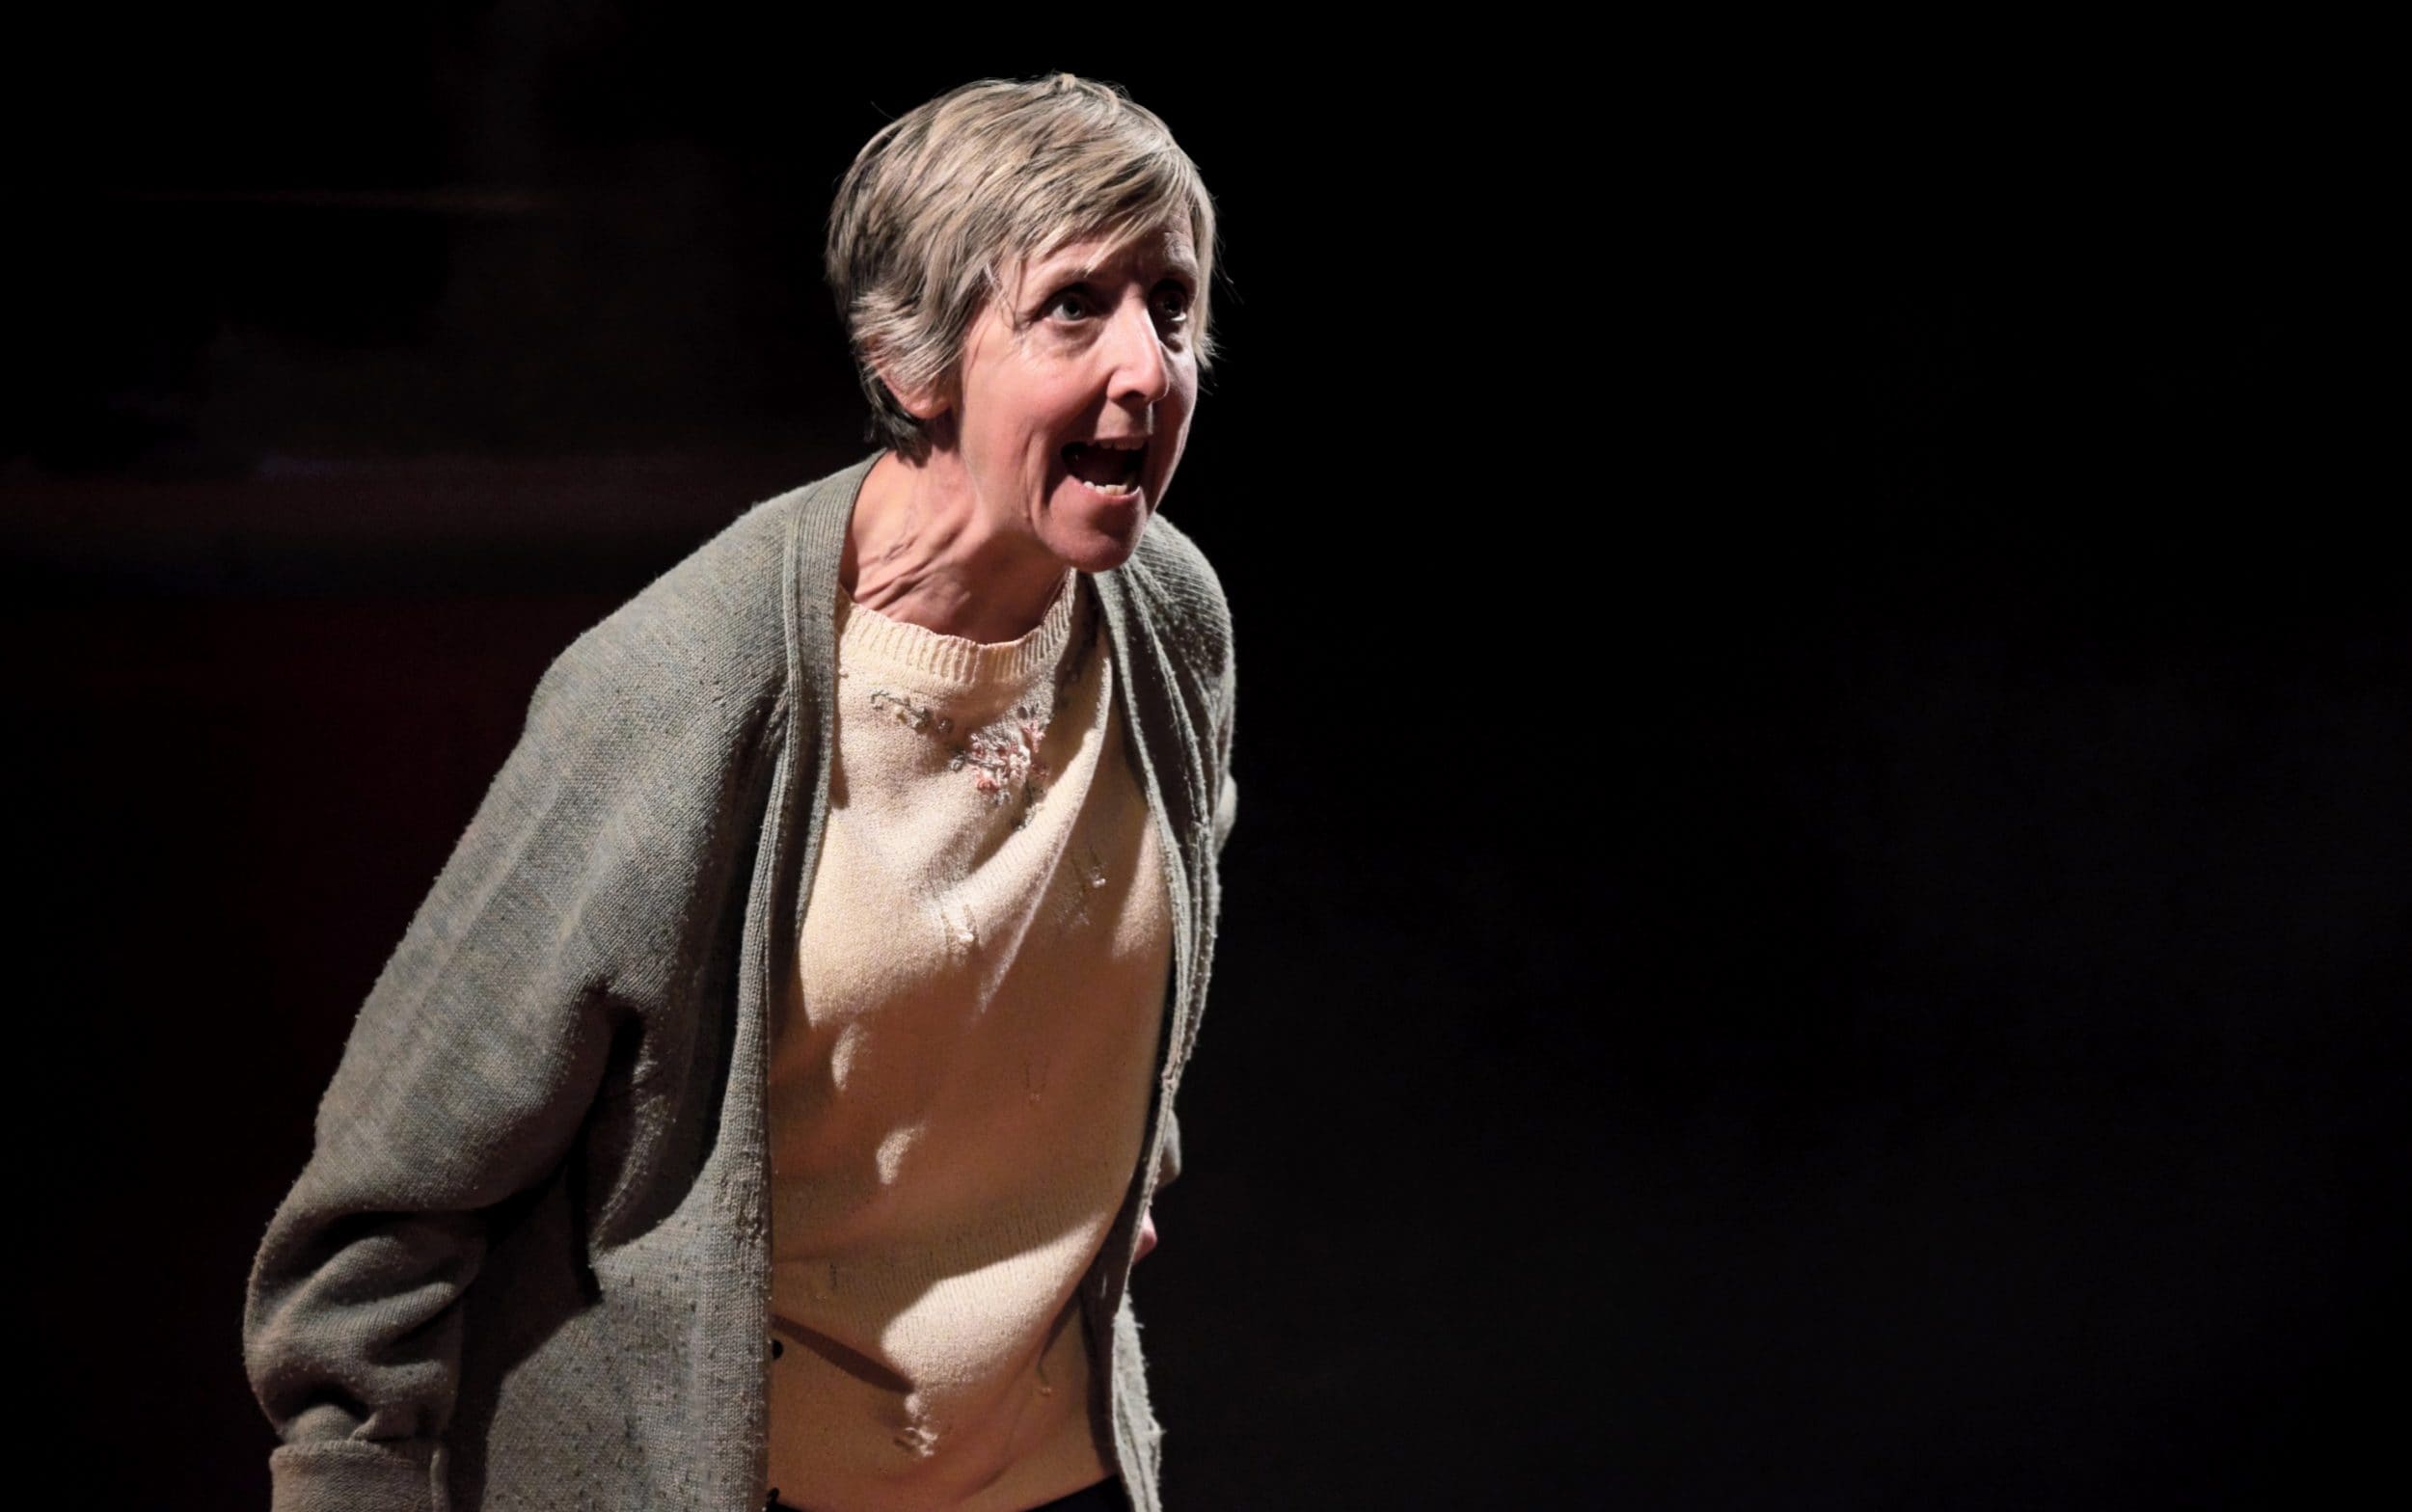 Julie Hesmondhalgh in There Are No Beginnings at Leeds Playhouse. Design, Camilla Clarke; lighting design, Amy Mae. Photo: Zoe Martin.